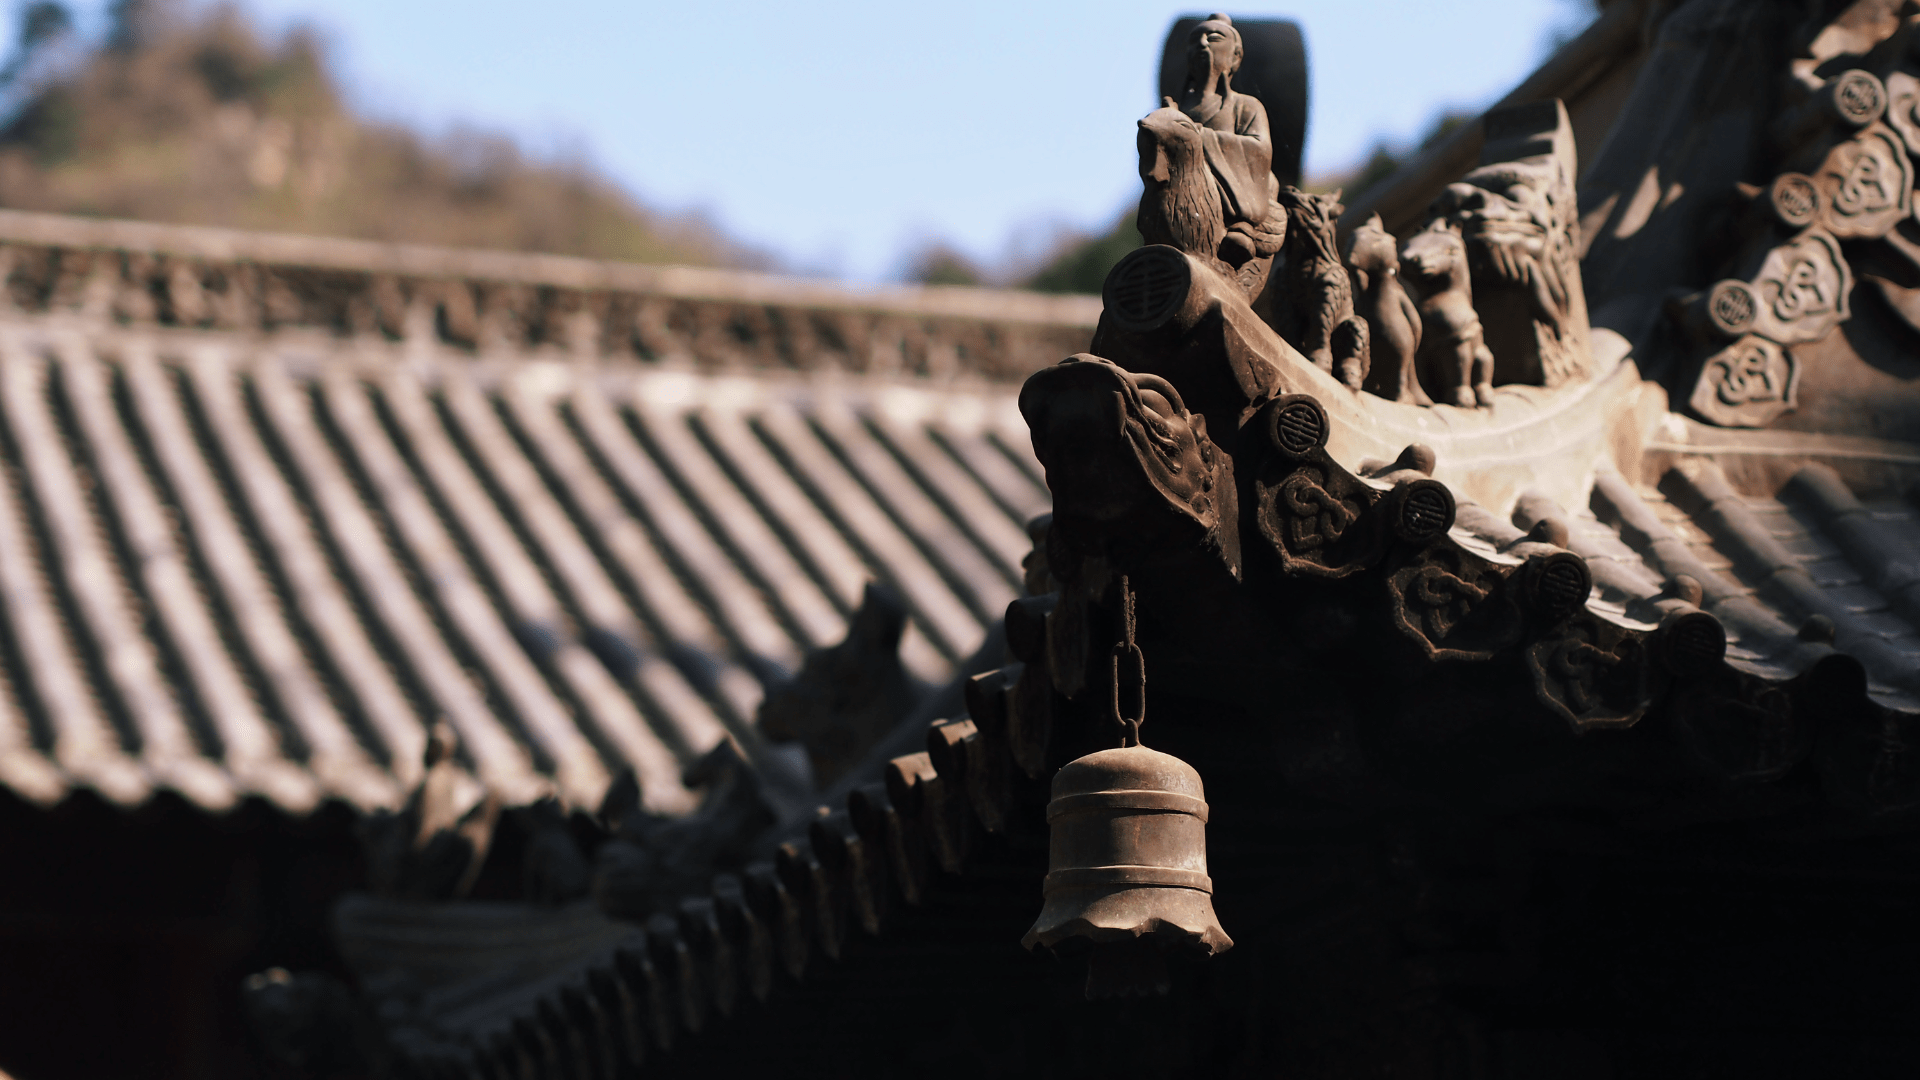 Mount Wudang is the birthplace and the sacred sanctuary of internal martial arts